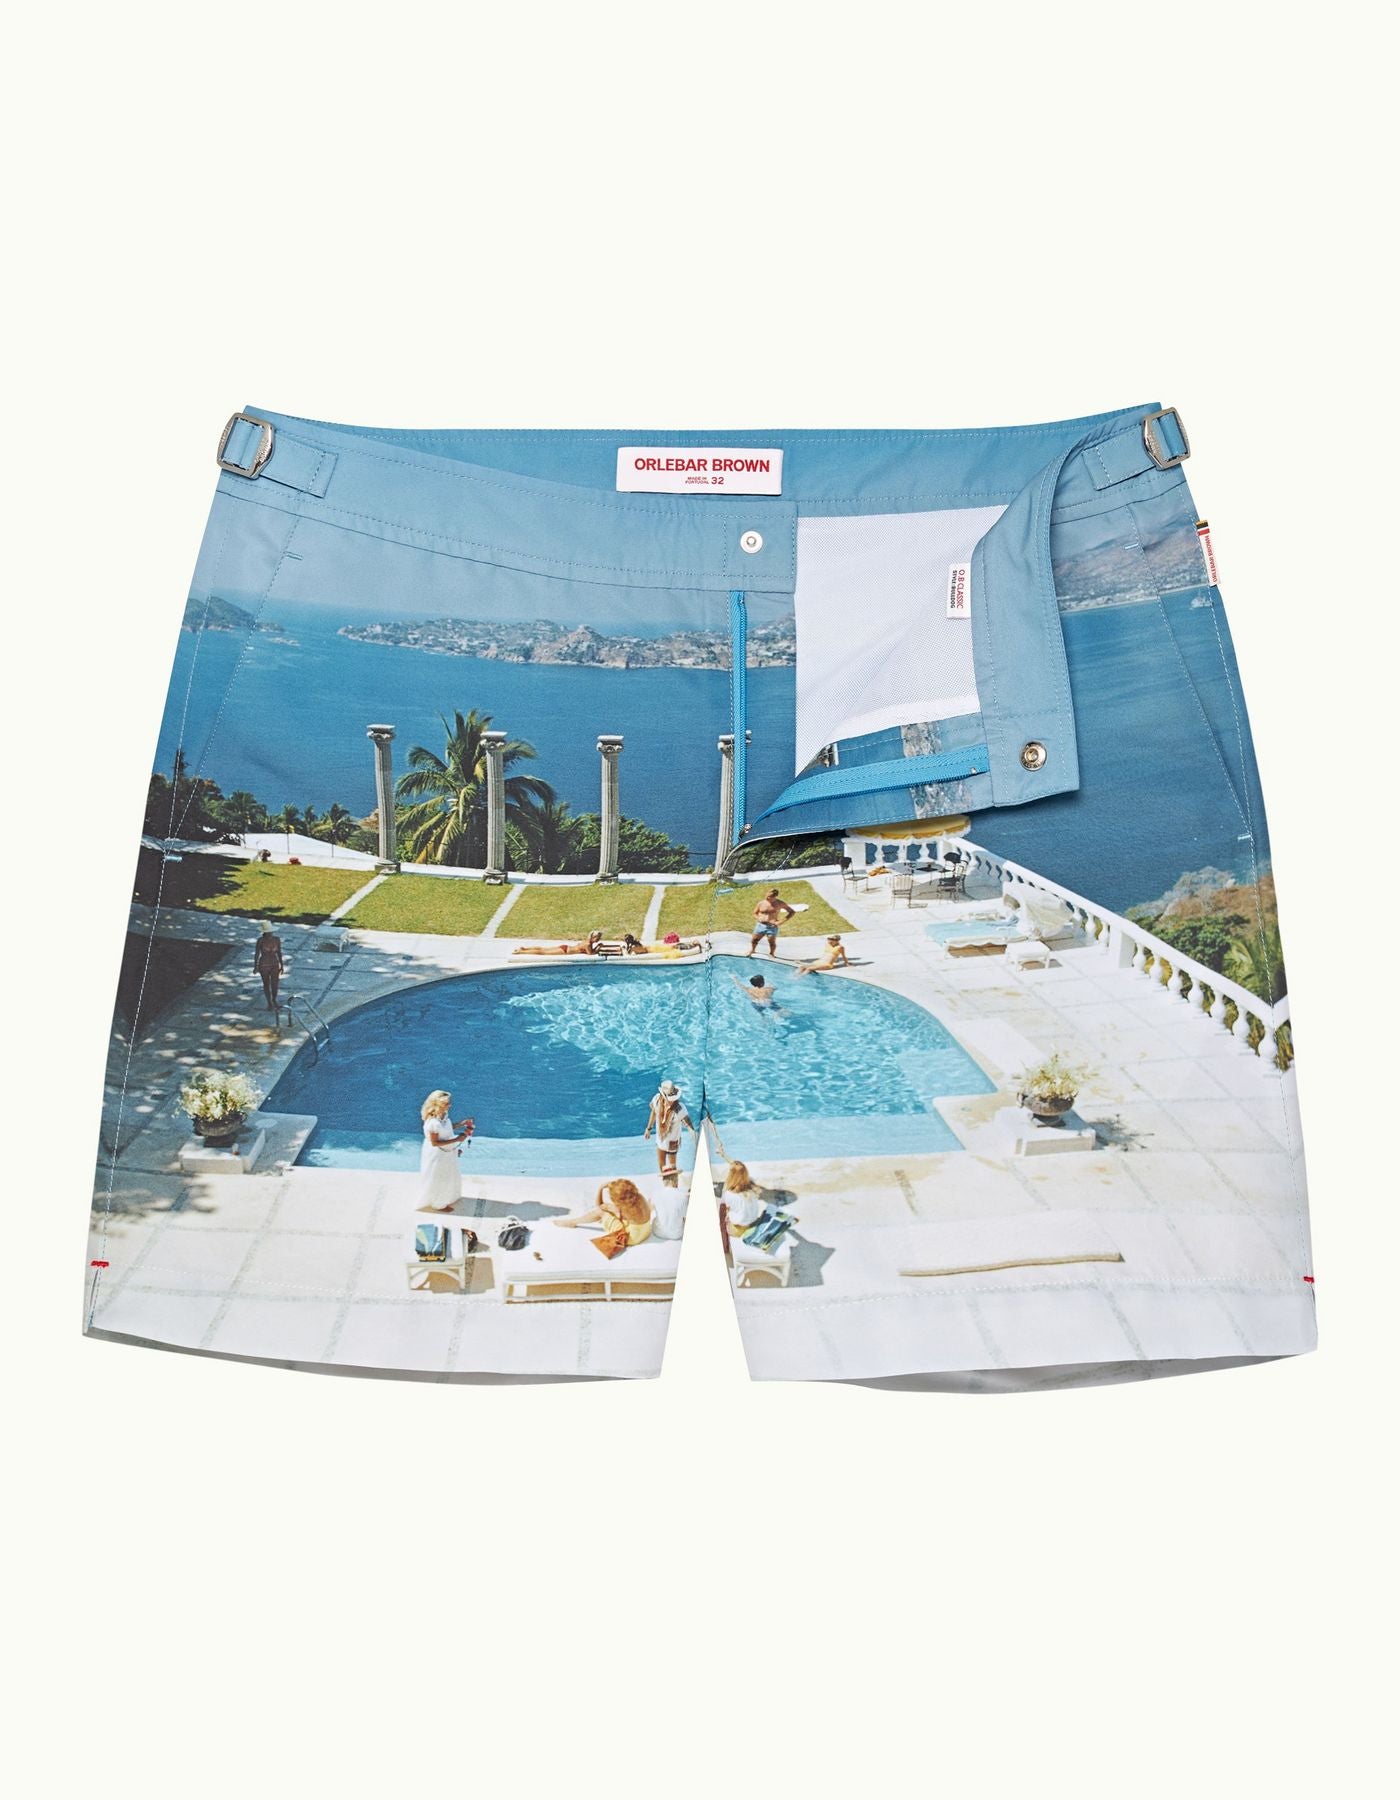 Bulldog Photographic Swimshorts in Pacifico